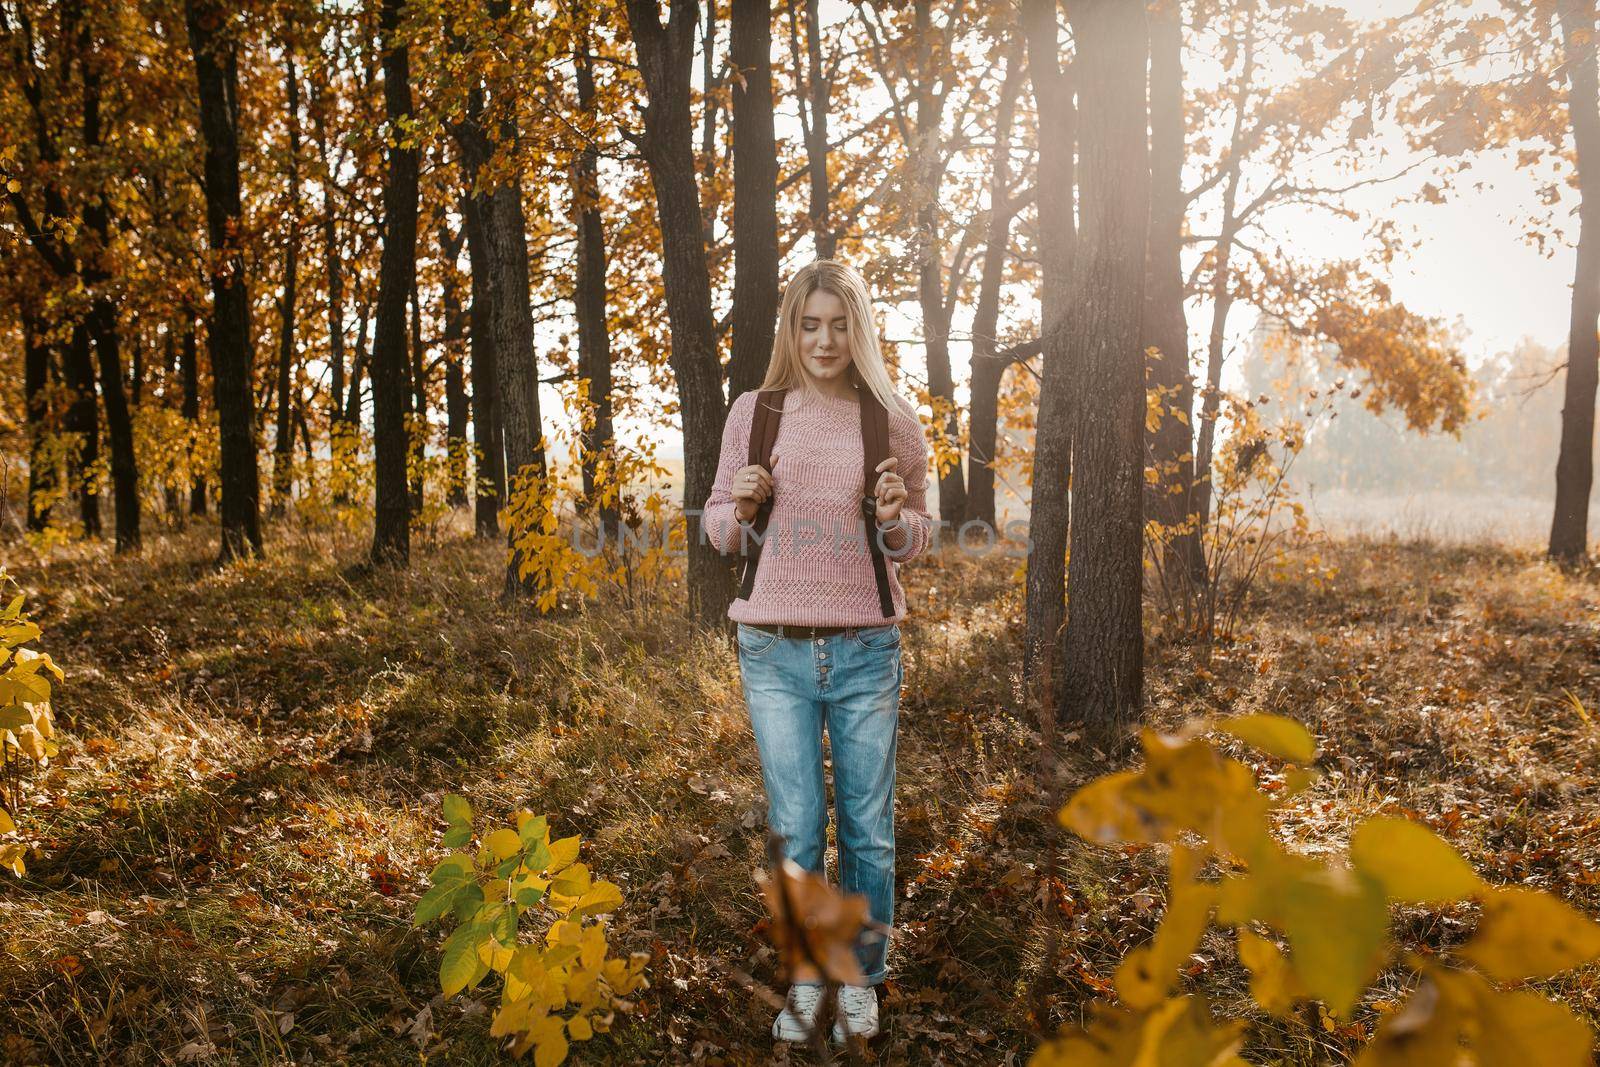 Female tourist with a backpack Stopped in a sunny autumn forest, a young Caucasian girl stands admiring the beauty of nature.